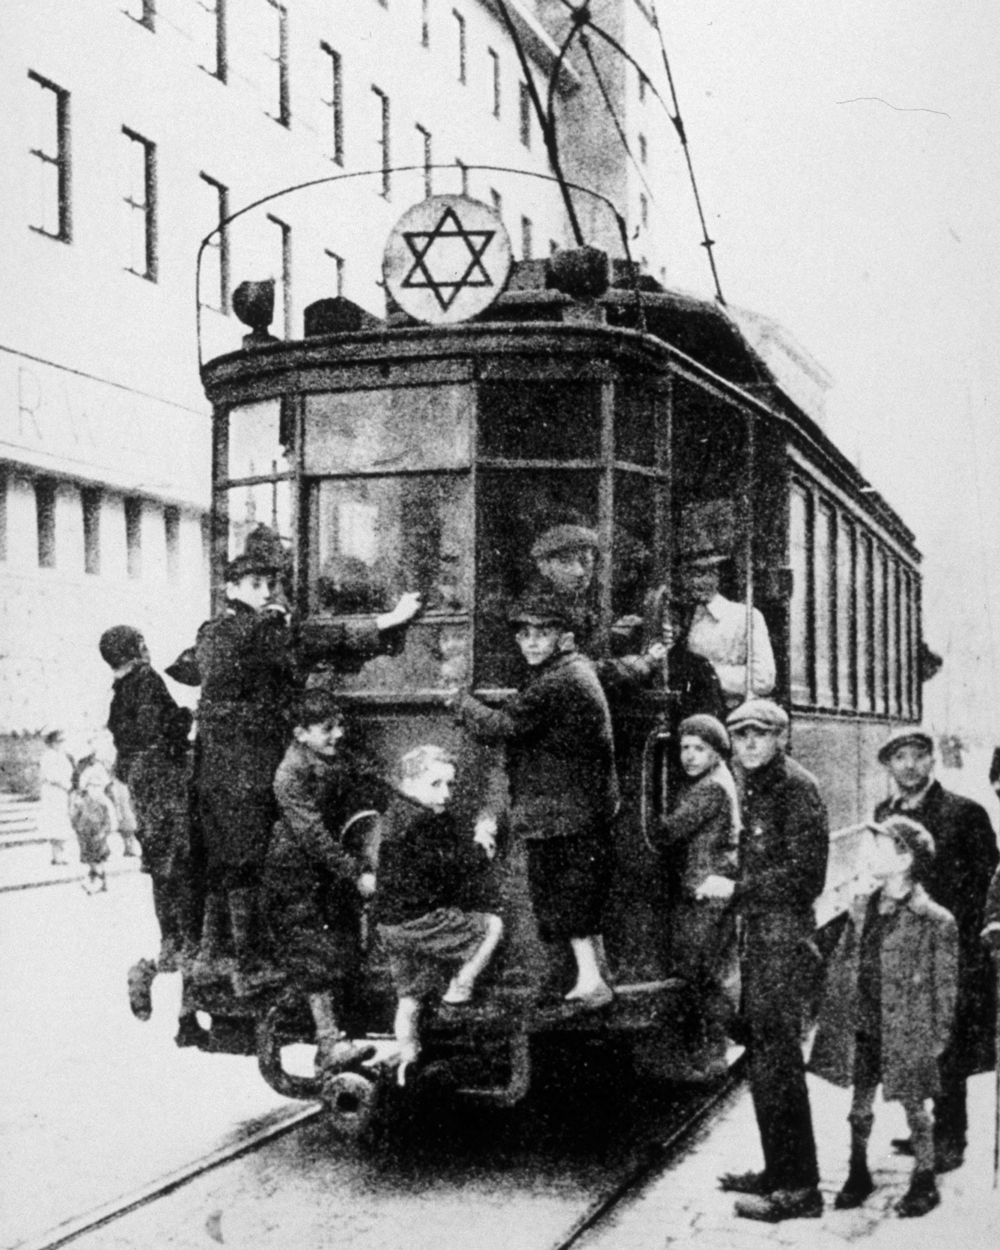 Rabbi Kalonymus Kalmish Shapira, the Piaseczno Rebbe, exhorted Jews to remain observant even in the harsh conditions of the ghetto. Jewish children grab a tram-ride in the Warsaw ghetto, 1940